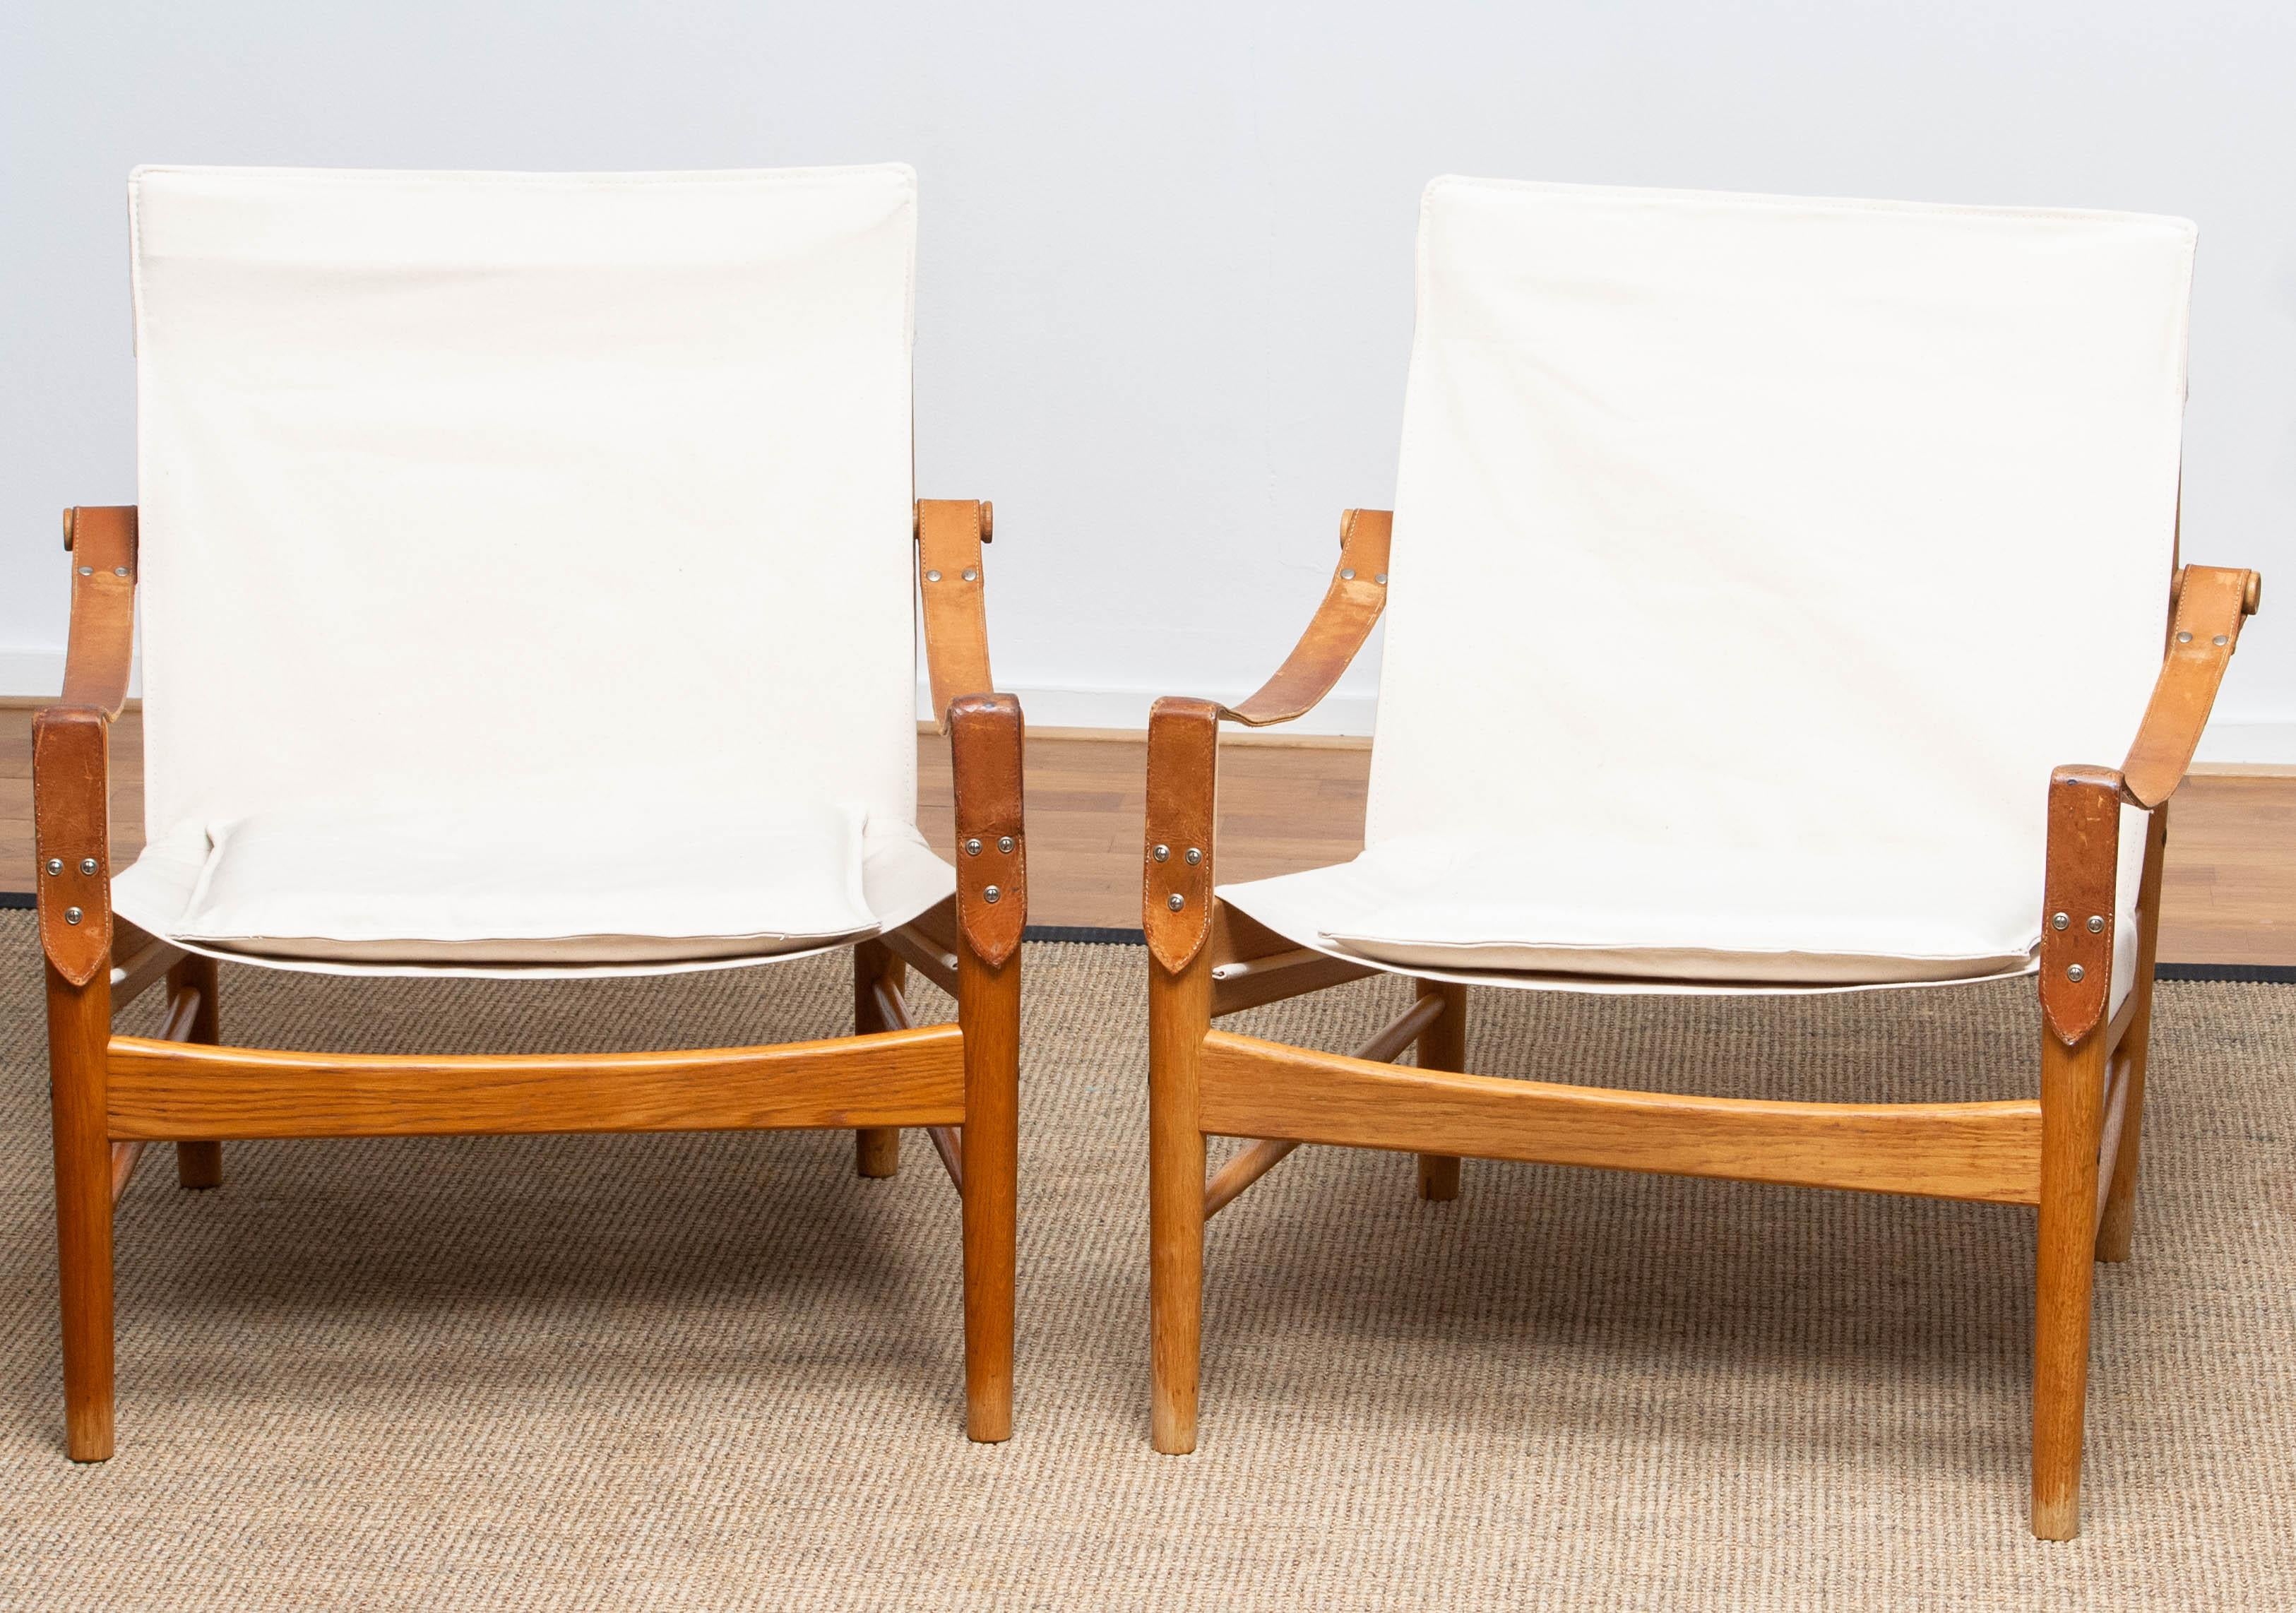 Beautiful pair of safari chairs designed by Hans Olsen for Viska Möbler in Kinna, Sweden.
These chairs are made of oak with a new canvas upholstery.
They are in a wonderful condition and marked.
Period: 1960s.
Dimensions: H 81 cm, W 73 cm, D 70 cm,